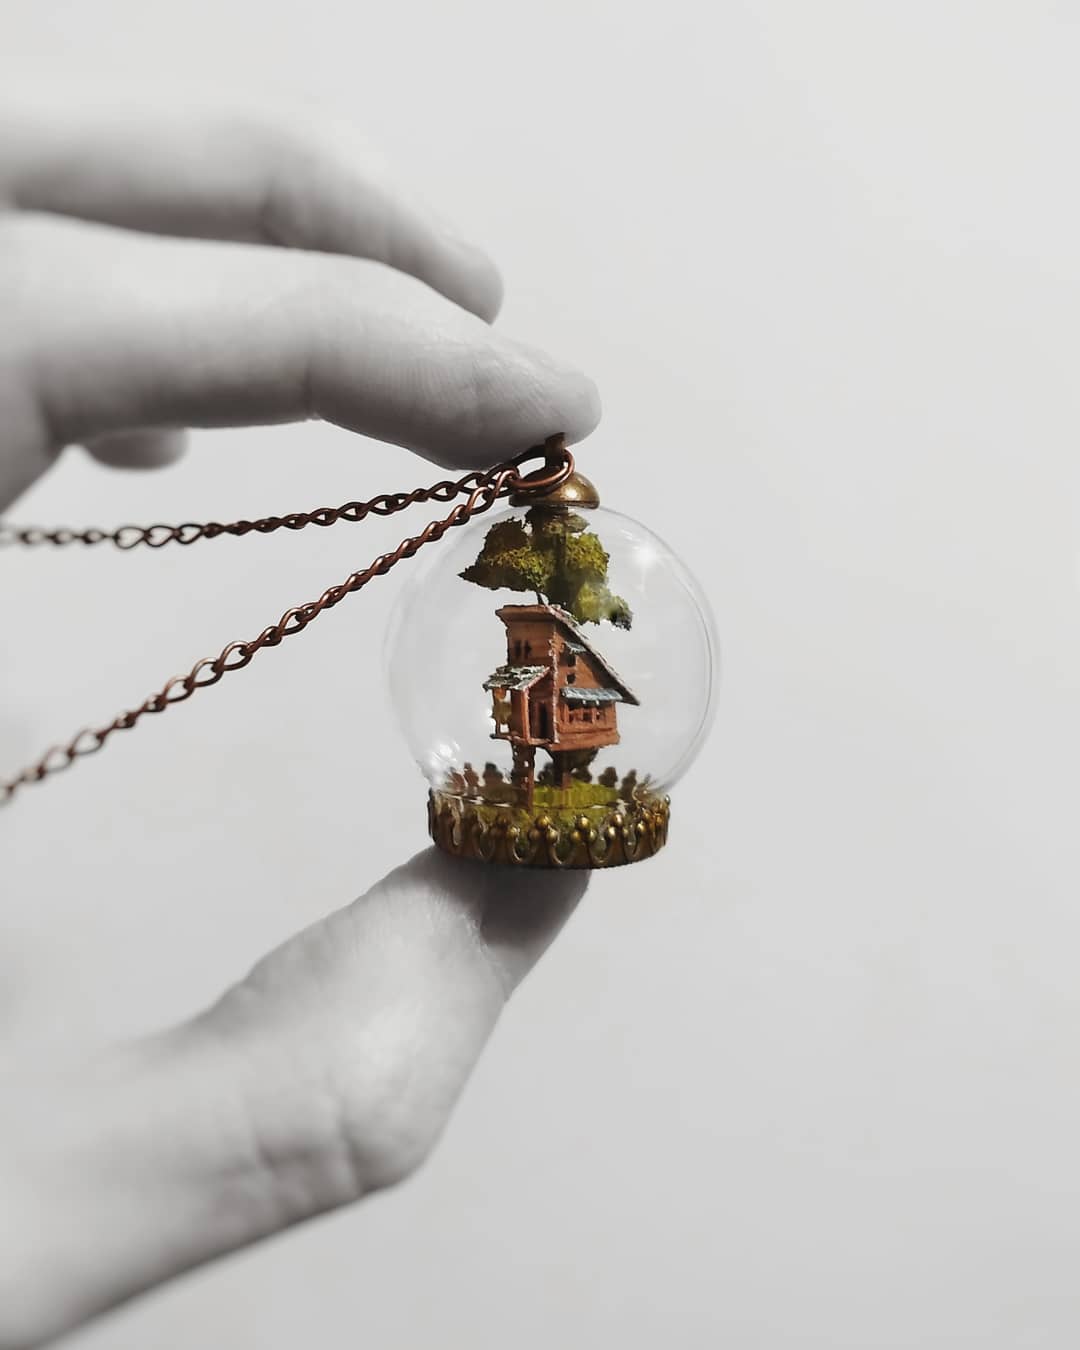 Fantastical Miniatures Encased In Glass Domes By Michael Davydow 11